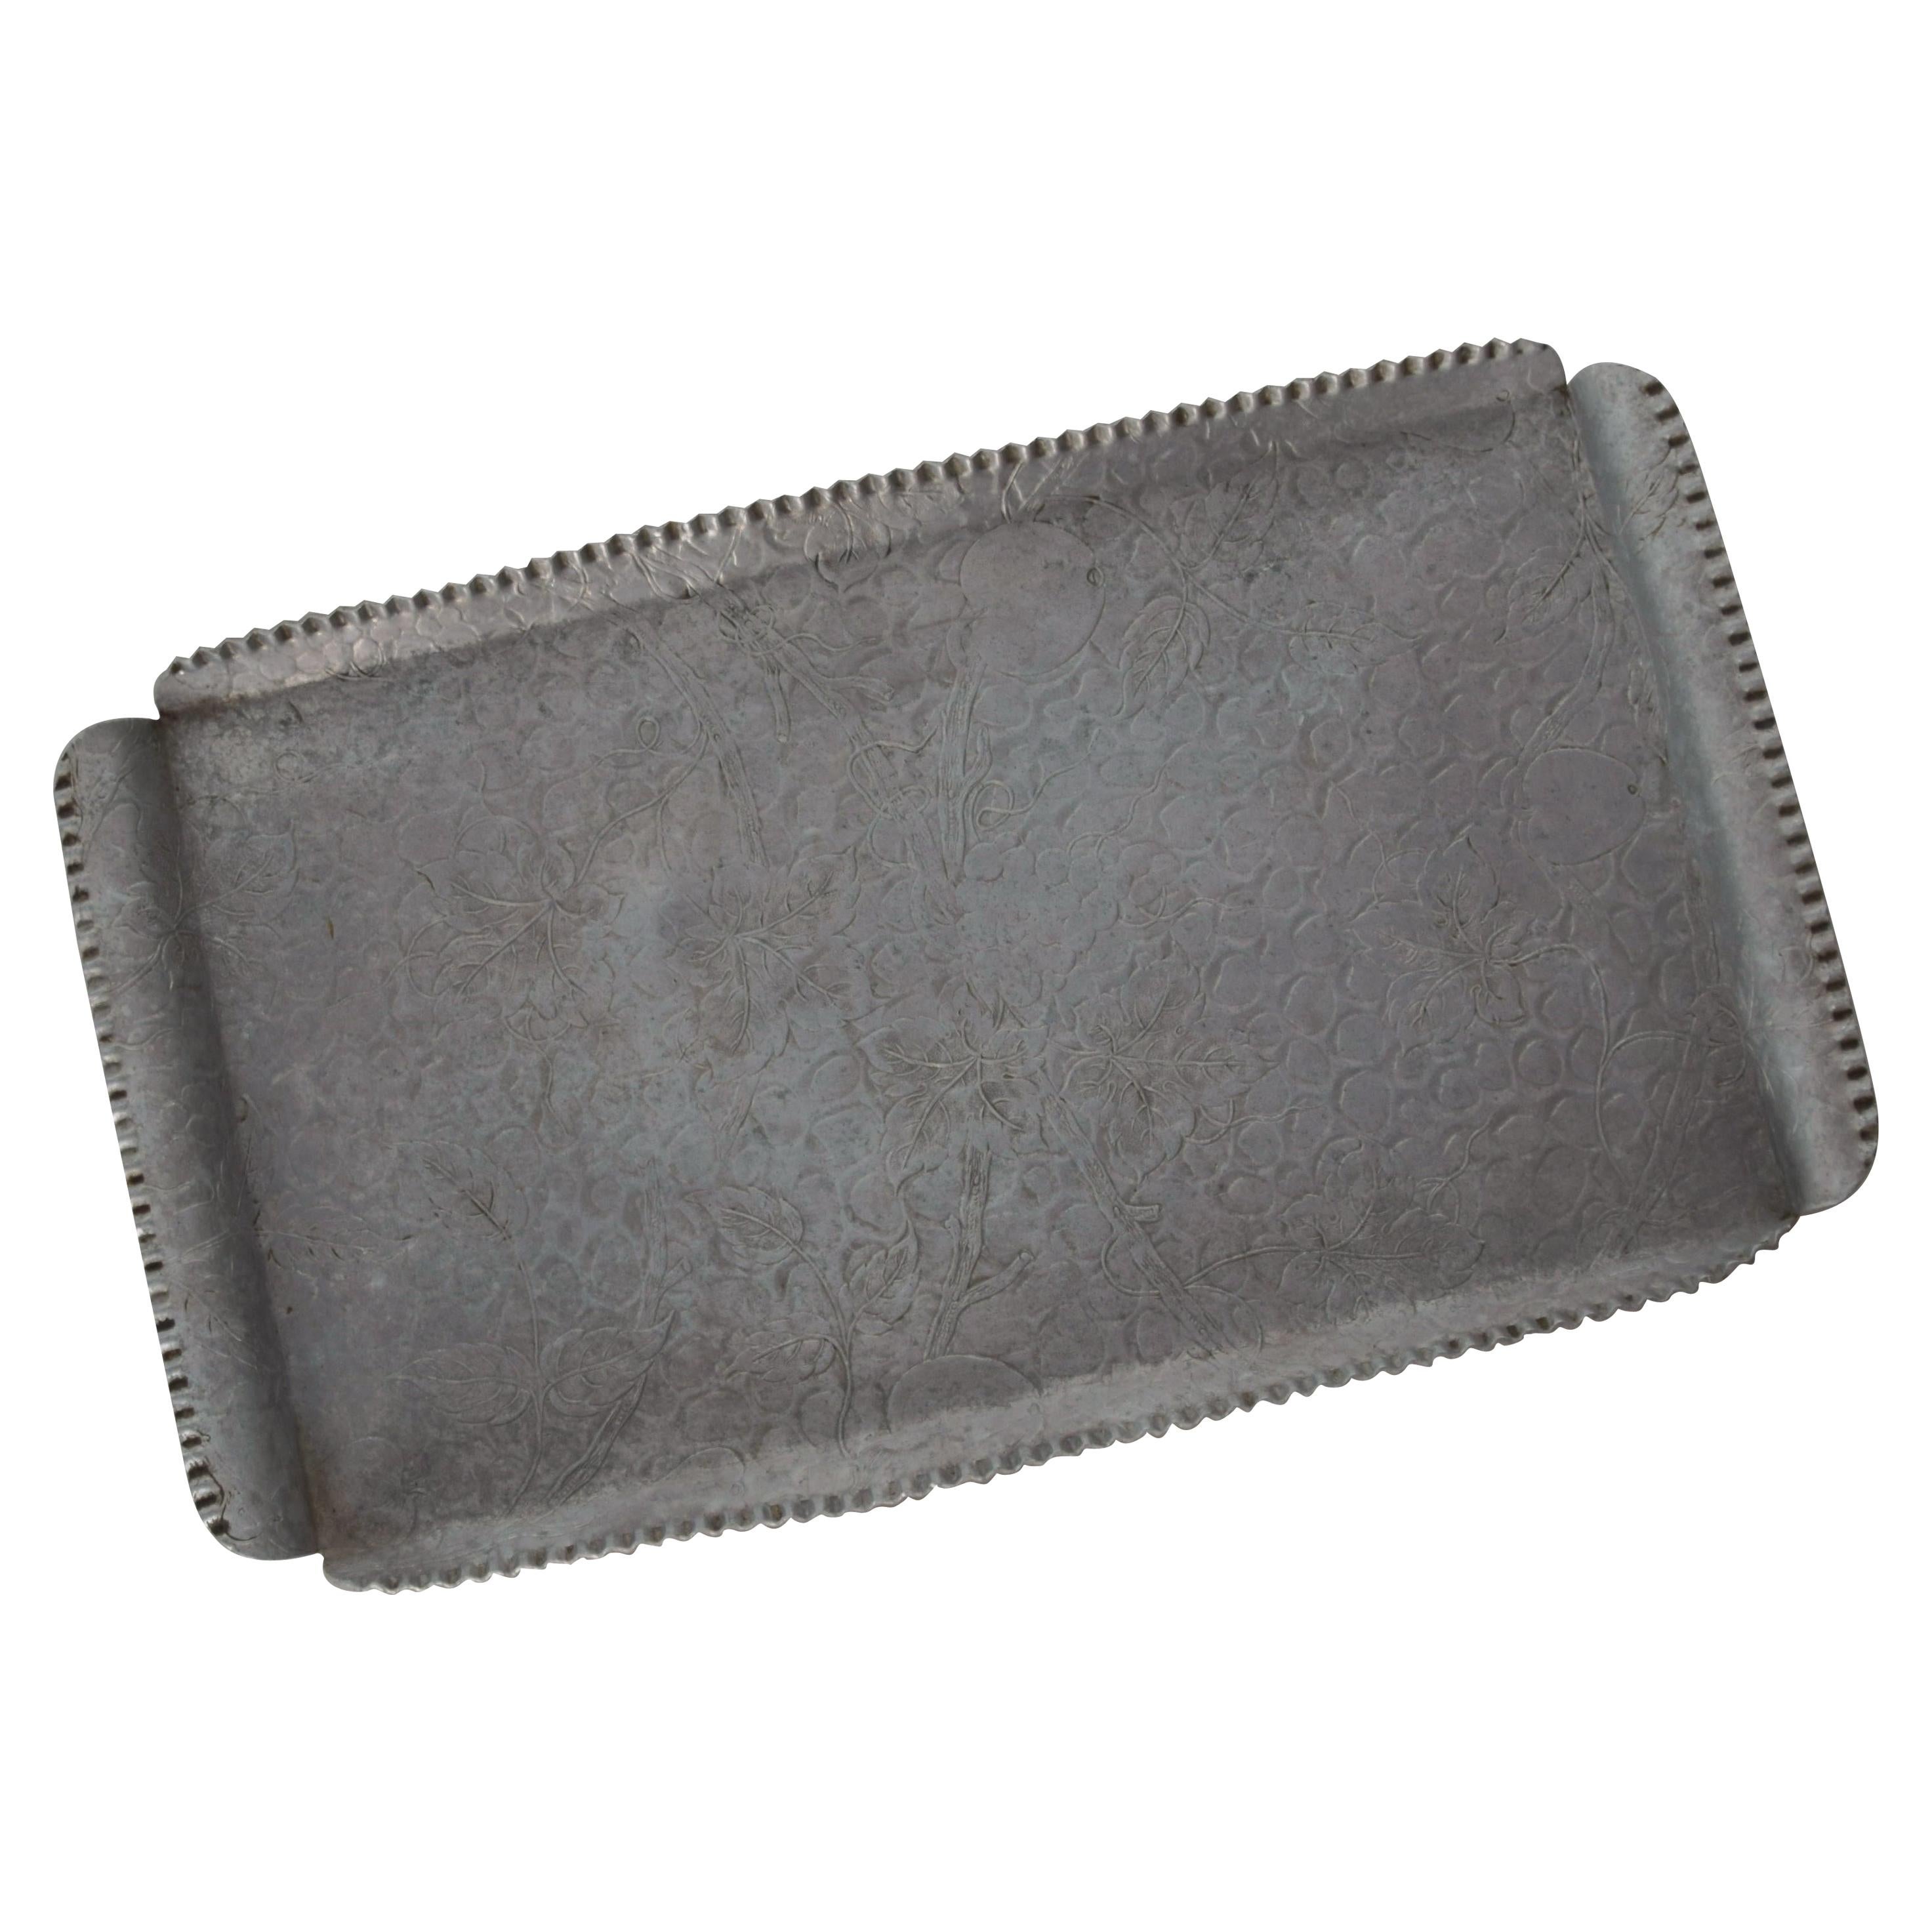 1950s Midcentury Serving Plate Tray in Hammered Aluminum 